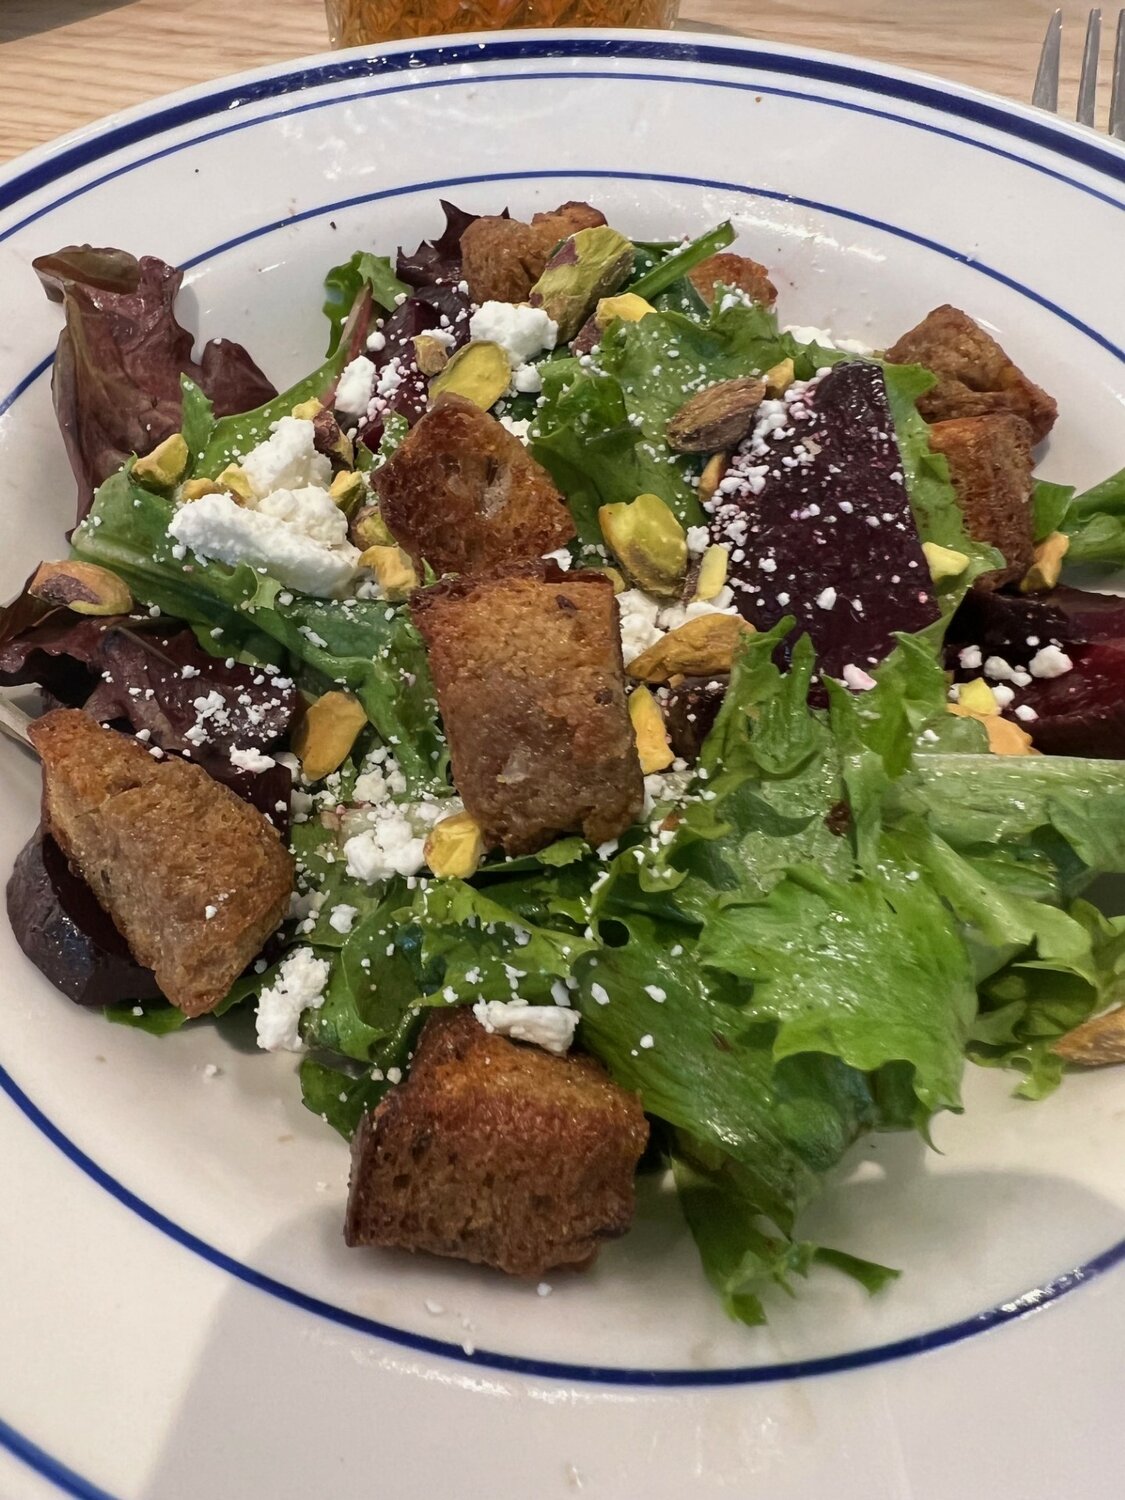 Beet salad with homemade sourdough rye croutons.